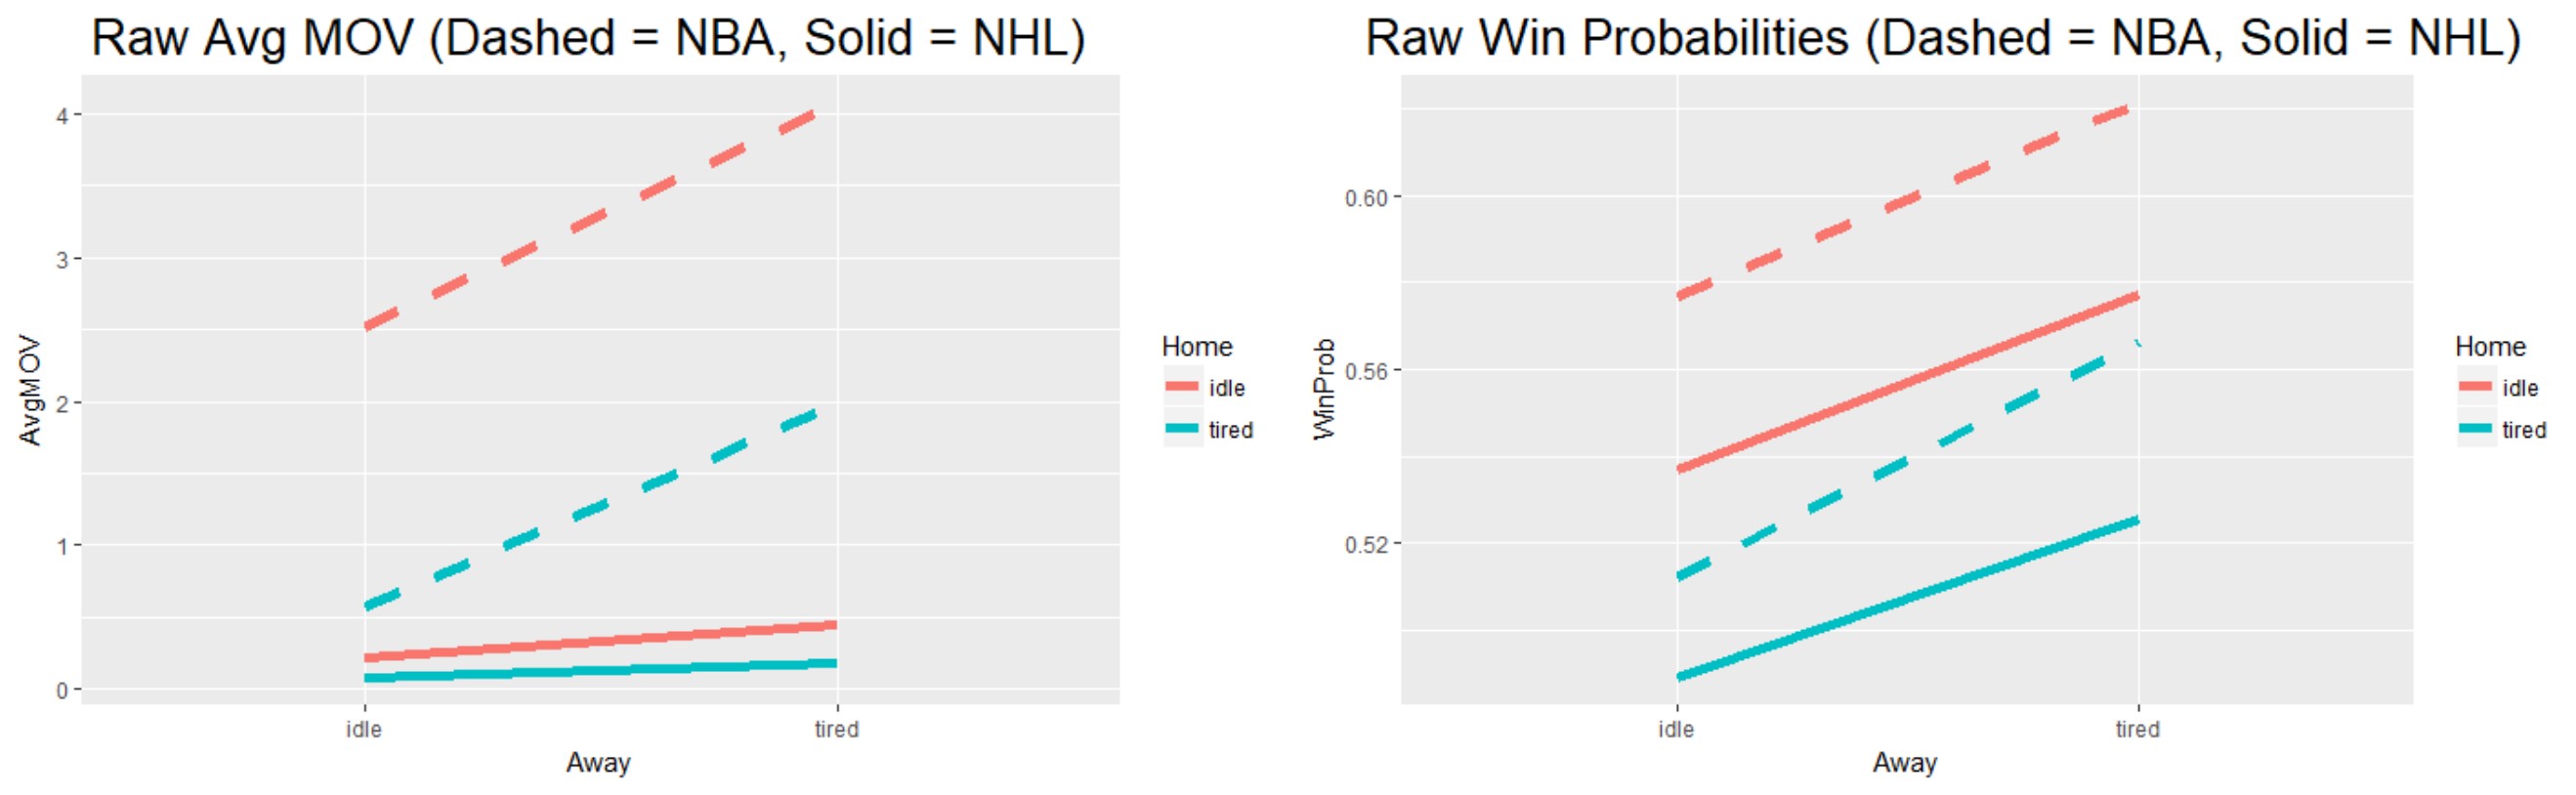 Plots of average Margin of Victory and Win Probabilities based on previous day game indicator